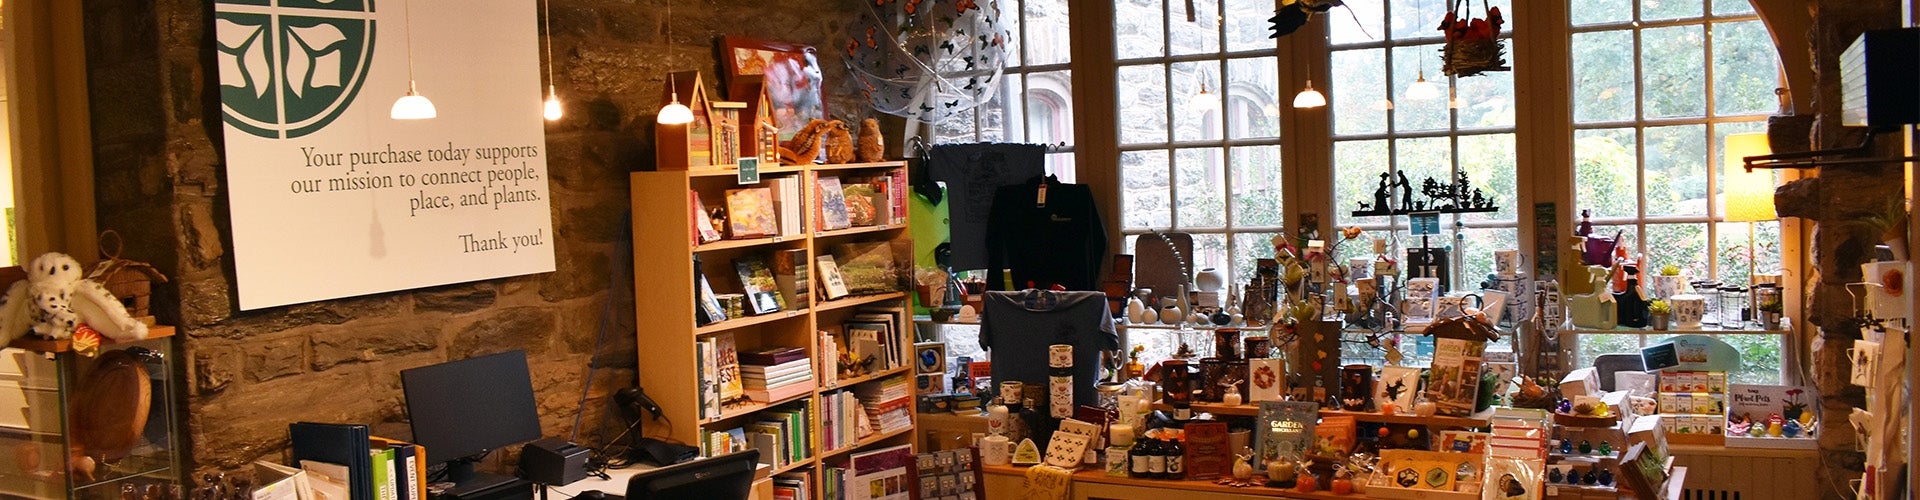 The Morris Arboretum gift shop with shelves filled with merchandise.